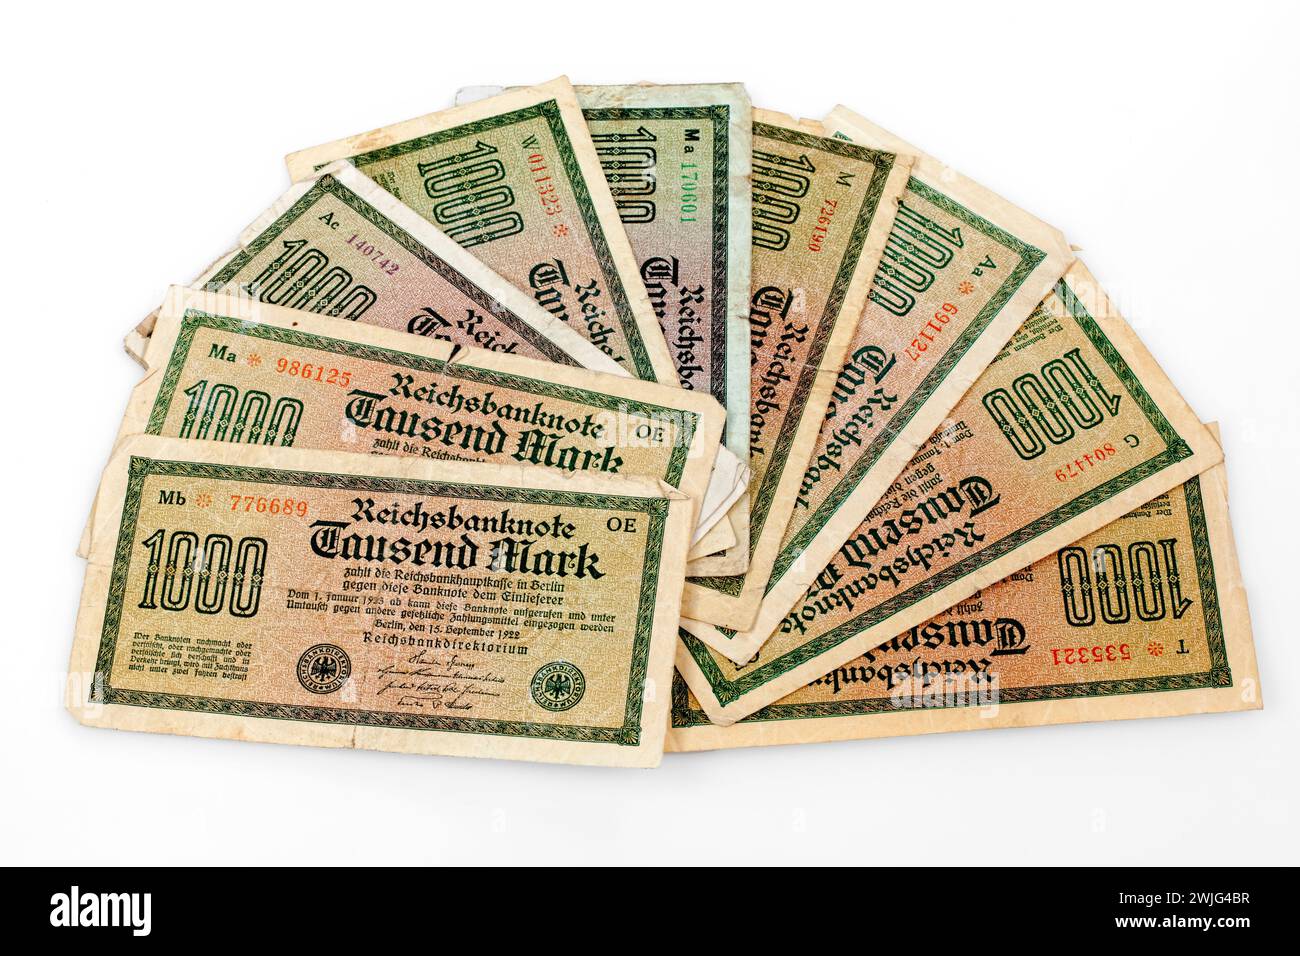 1000 Mark, Reichsbank banknotes, Germany, 1922, Europe Stock Photo